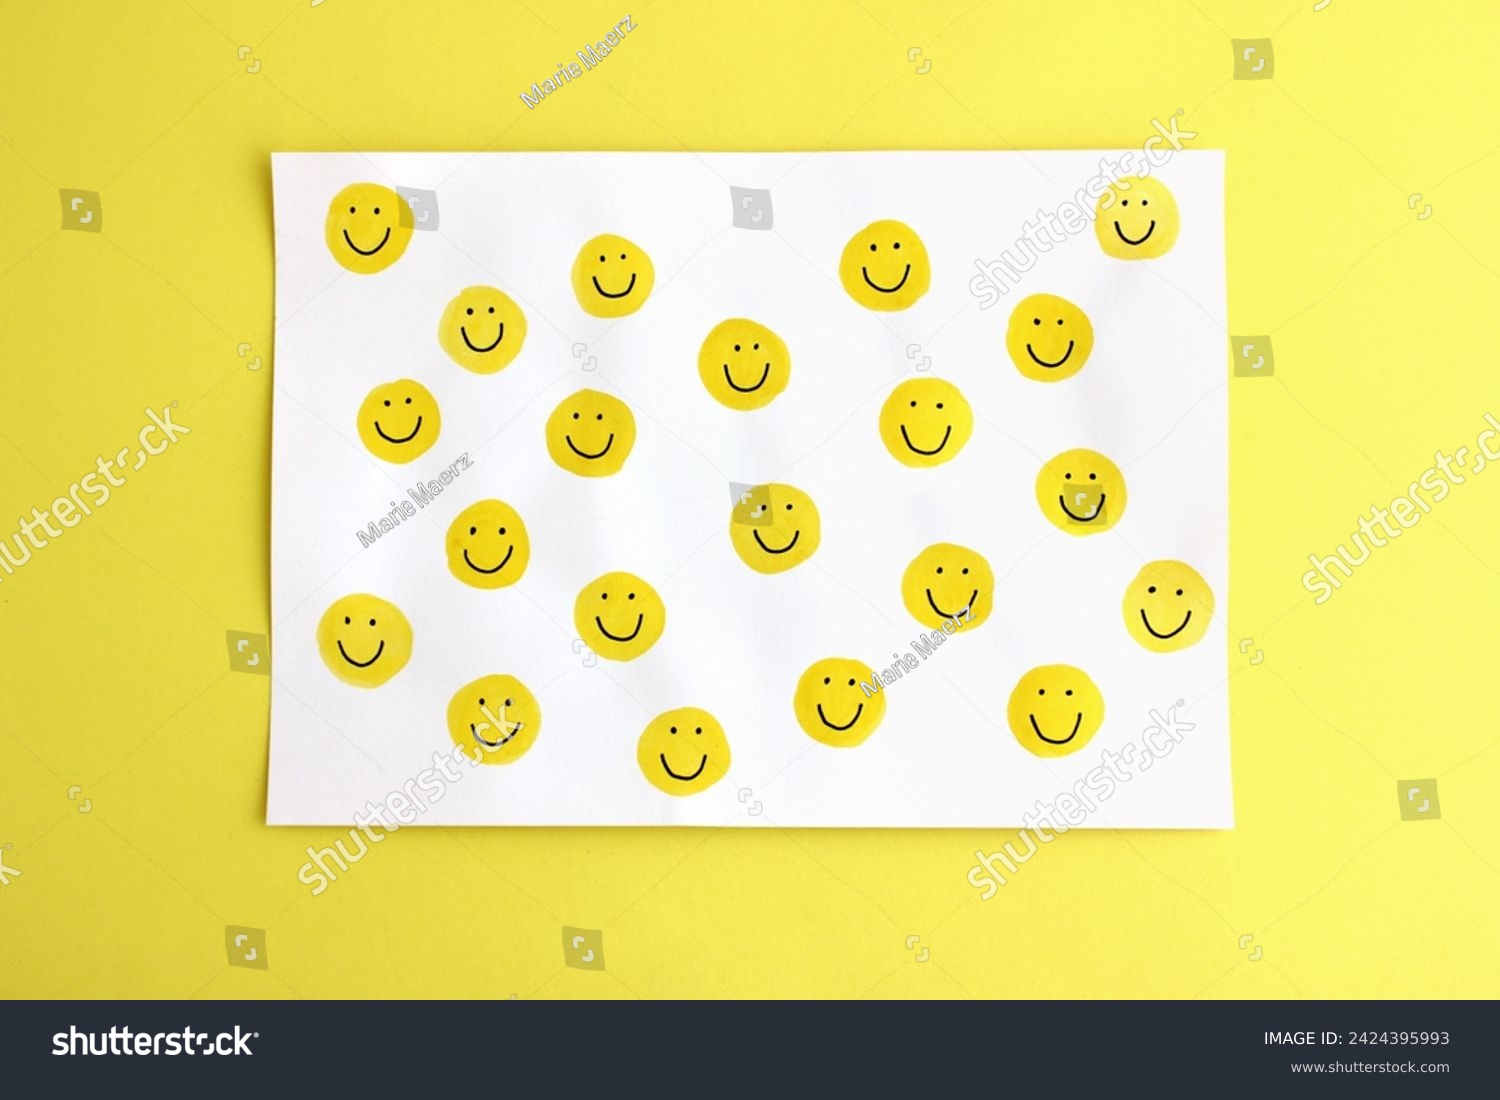 Many happy yellow smileys handpainted on white card on a bright yellow background - authentic image representing the concept of positive emotions, happiness, positive vibes, energy, motivation, fun #2424395993